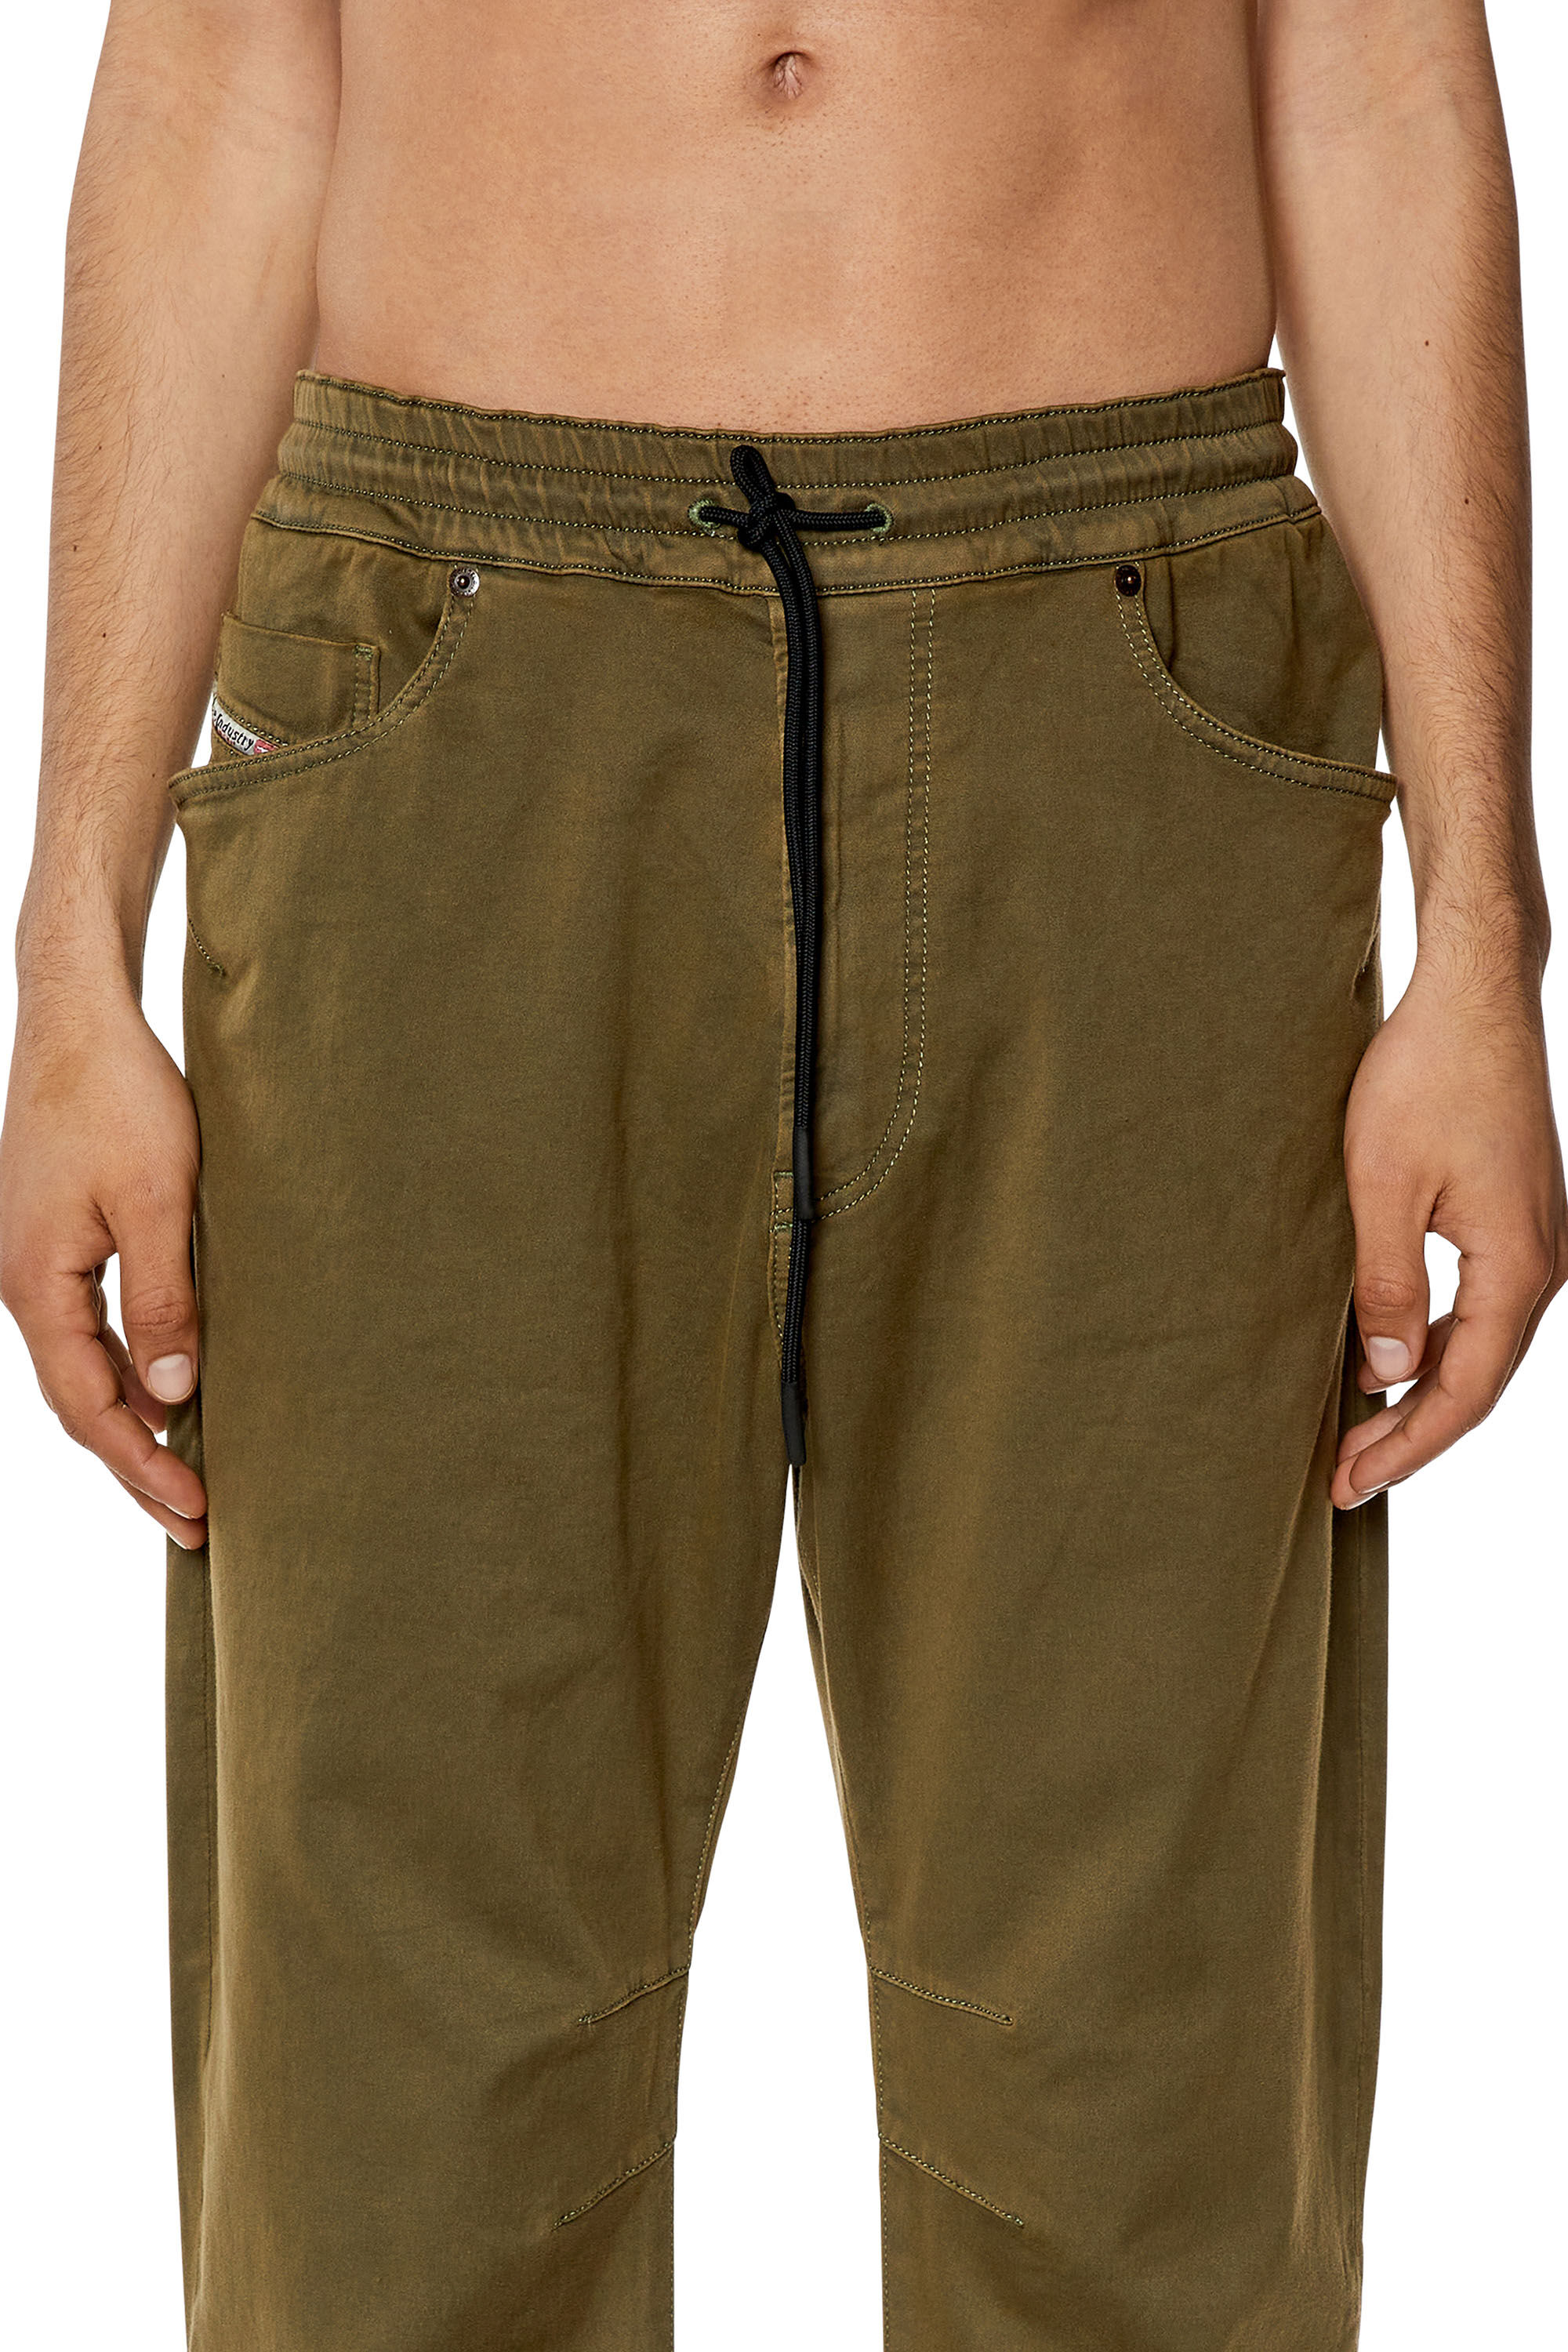 Diesel - Tapered 2040 D-Amage Joggjeans® 068DY, Hombre Tapered 2040 D-Amage Joggjeans® in Verde - Image 5